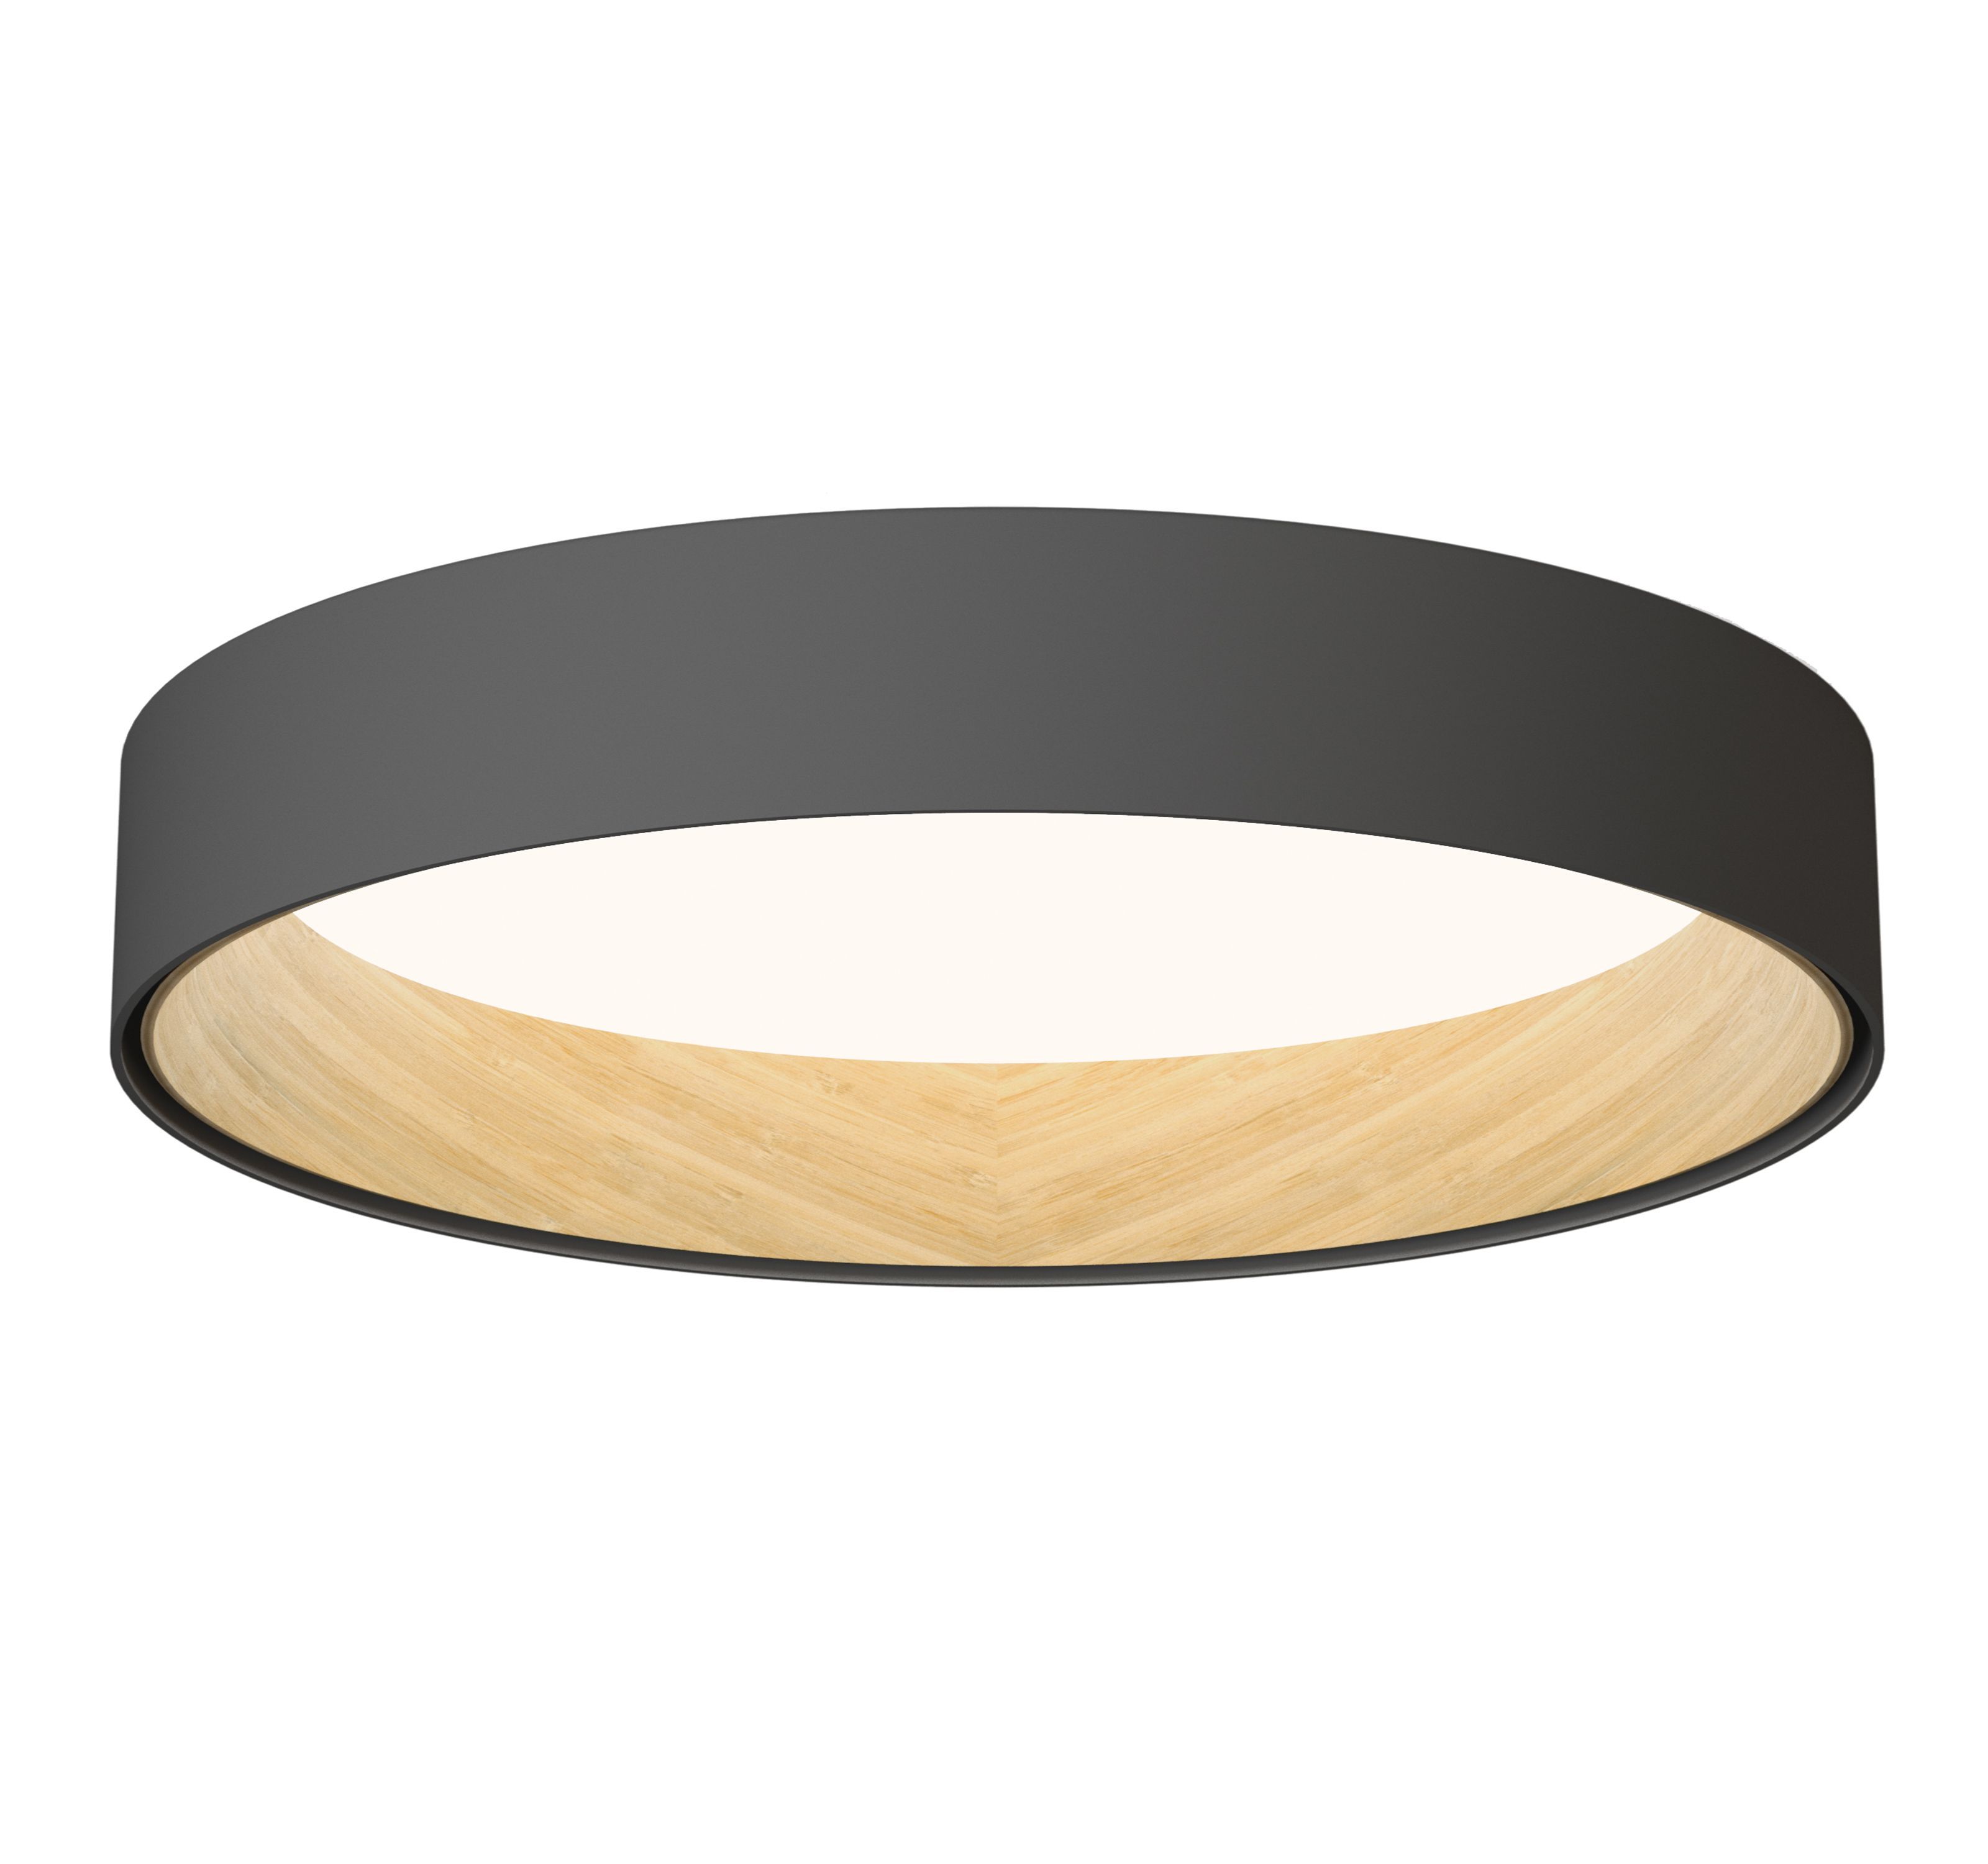 Duo by Vibia Ceiling lamp